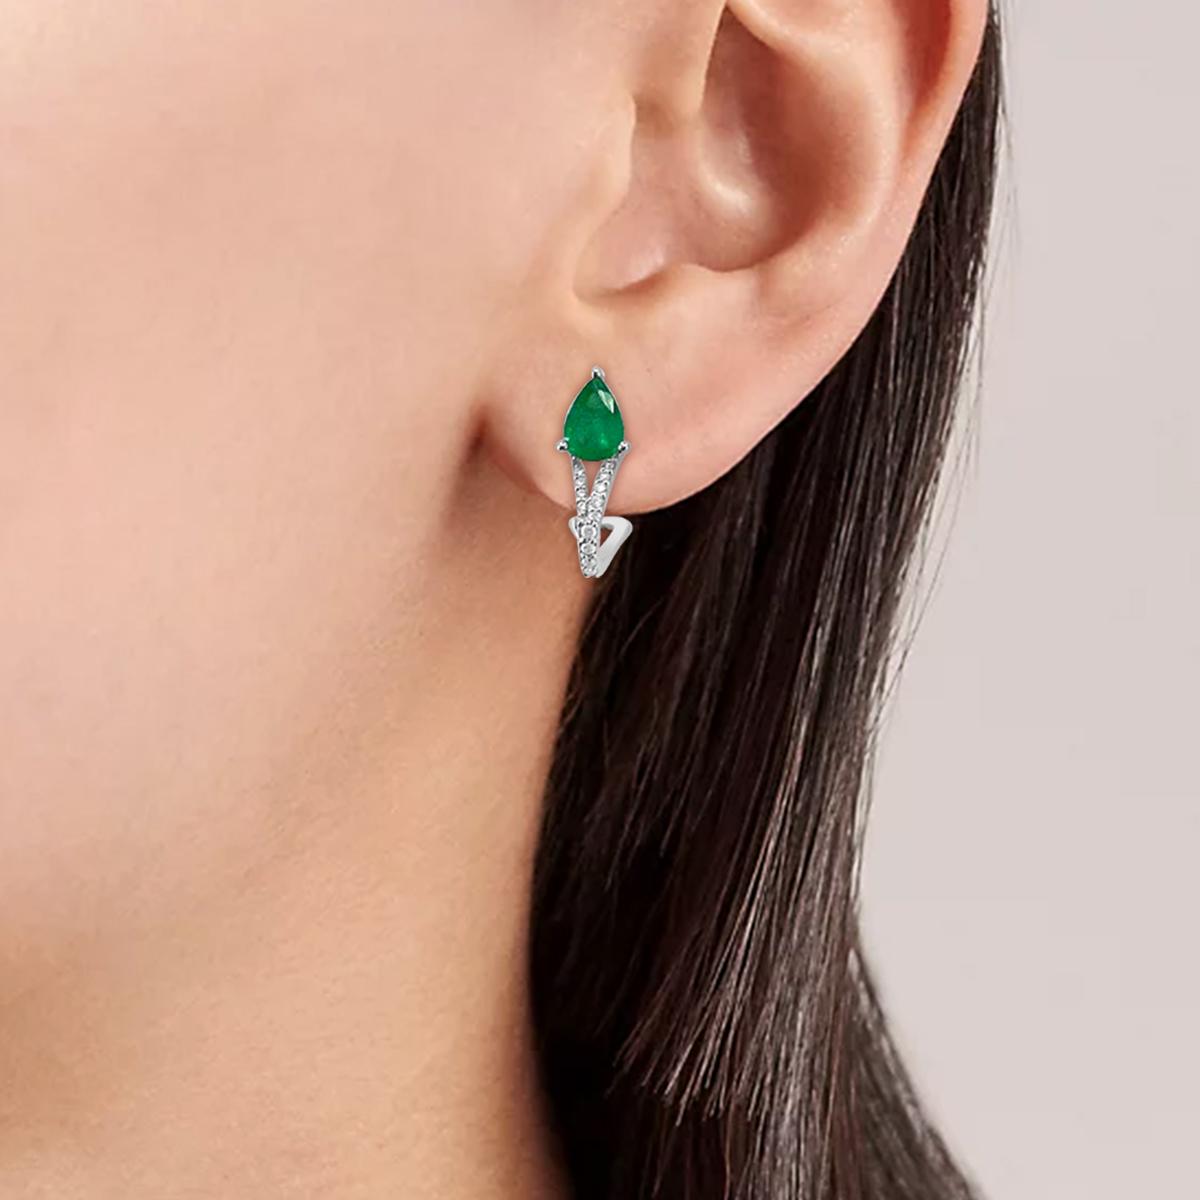 Pear Cut 18K White Gold 1.15cts Emerald and Diamond Earring, Style# TS1024E